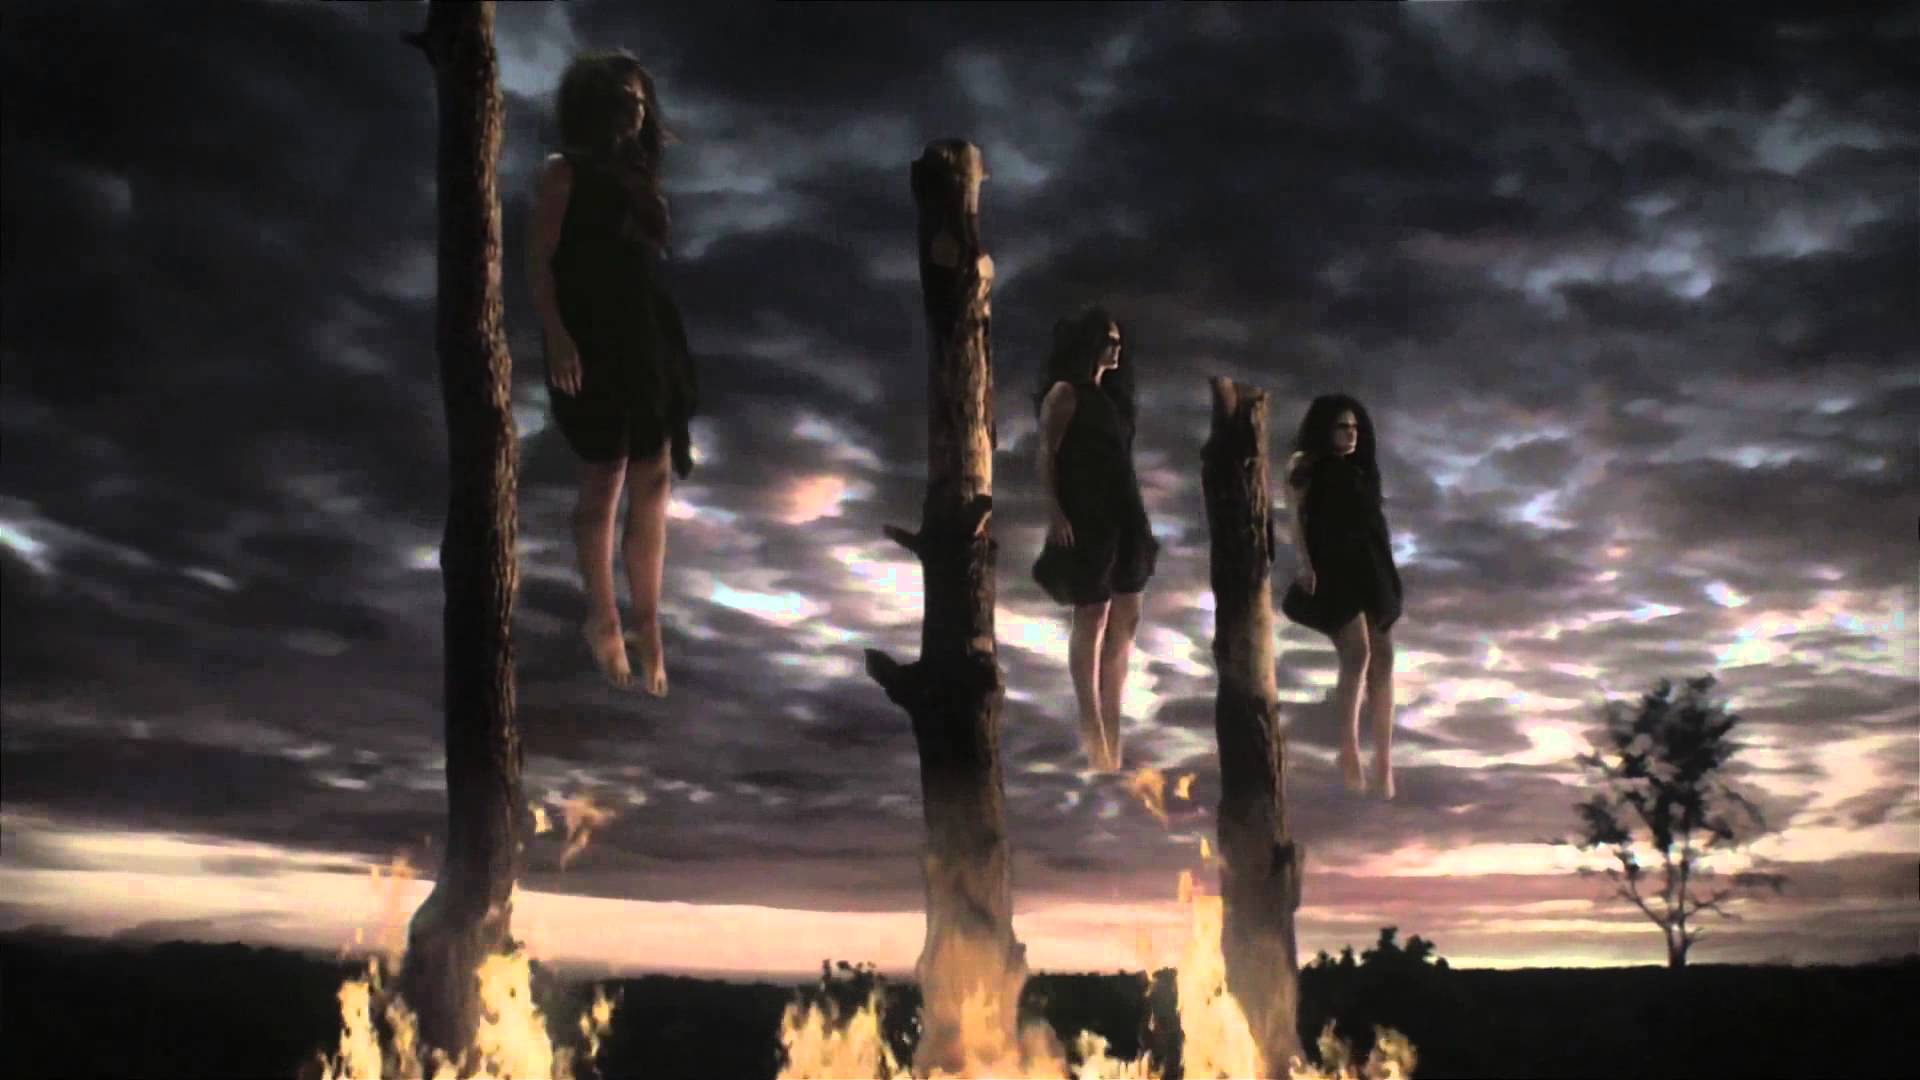 American Horror Story Coven Wallpapers Wallpaper Cave